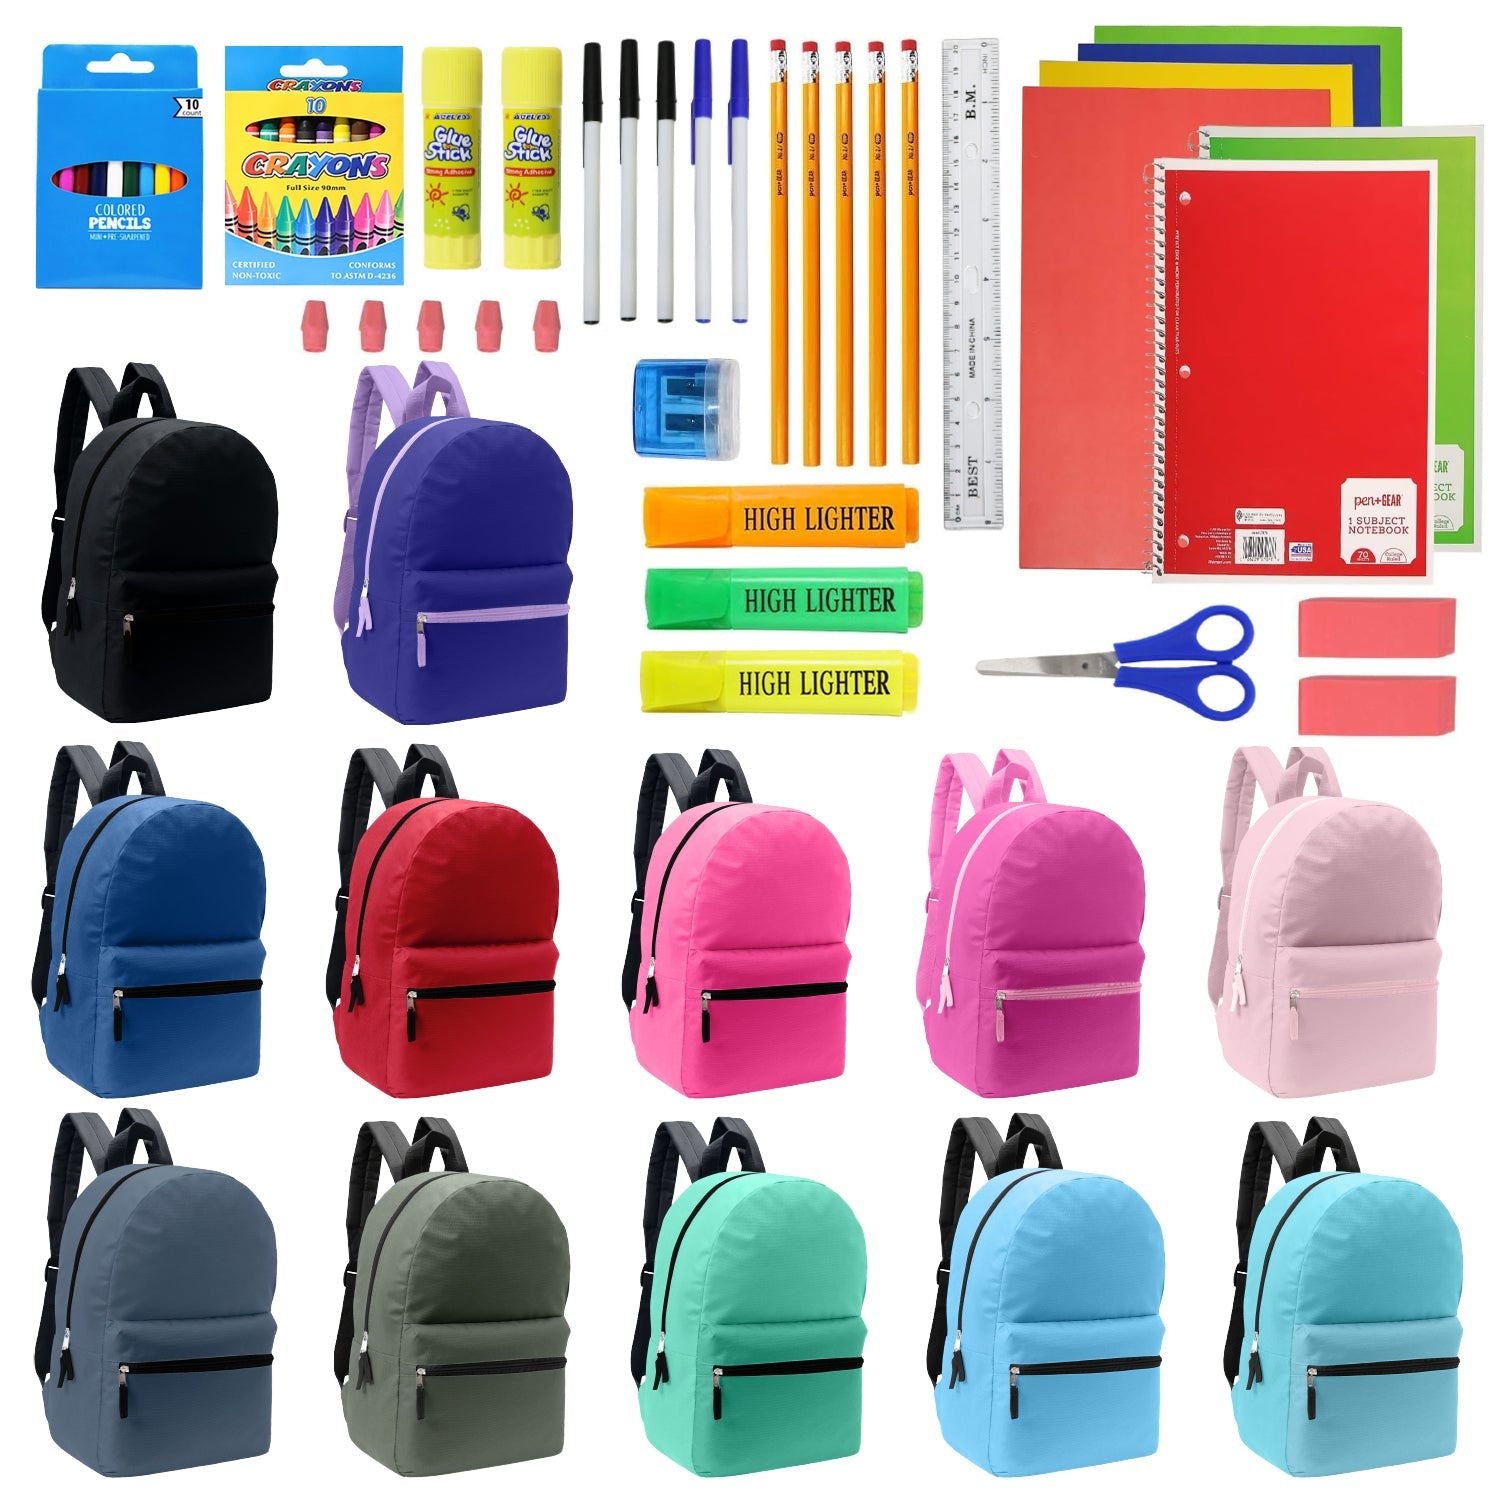 12 Wholesale Blank Student 17" Backpacks in Assorted Colors and 12 Bulk School Supply Kits of Your Choice